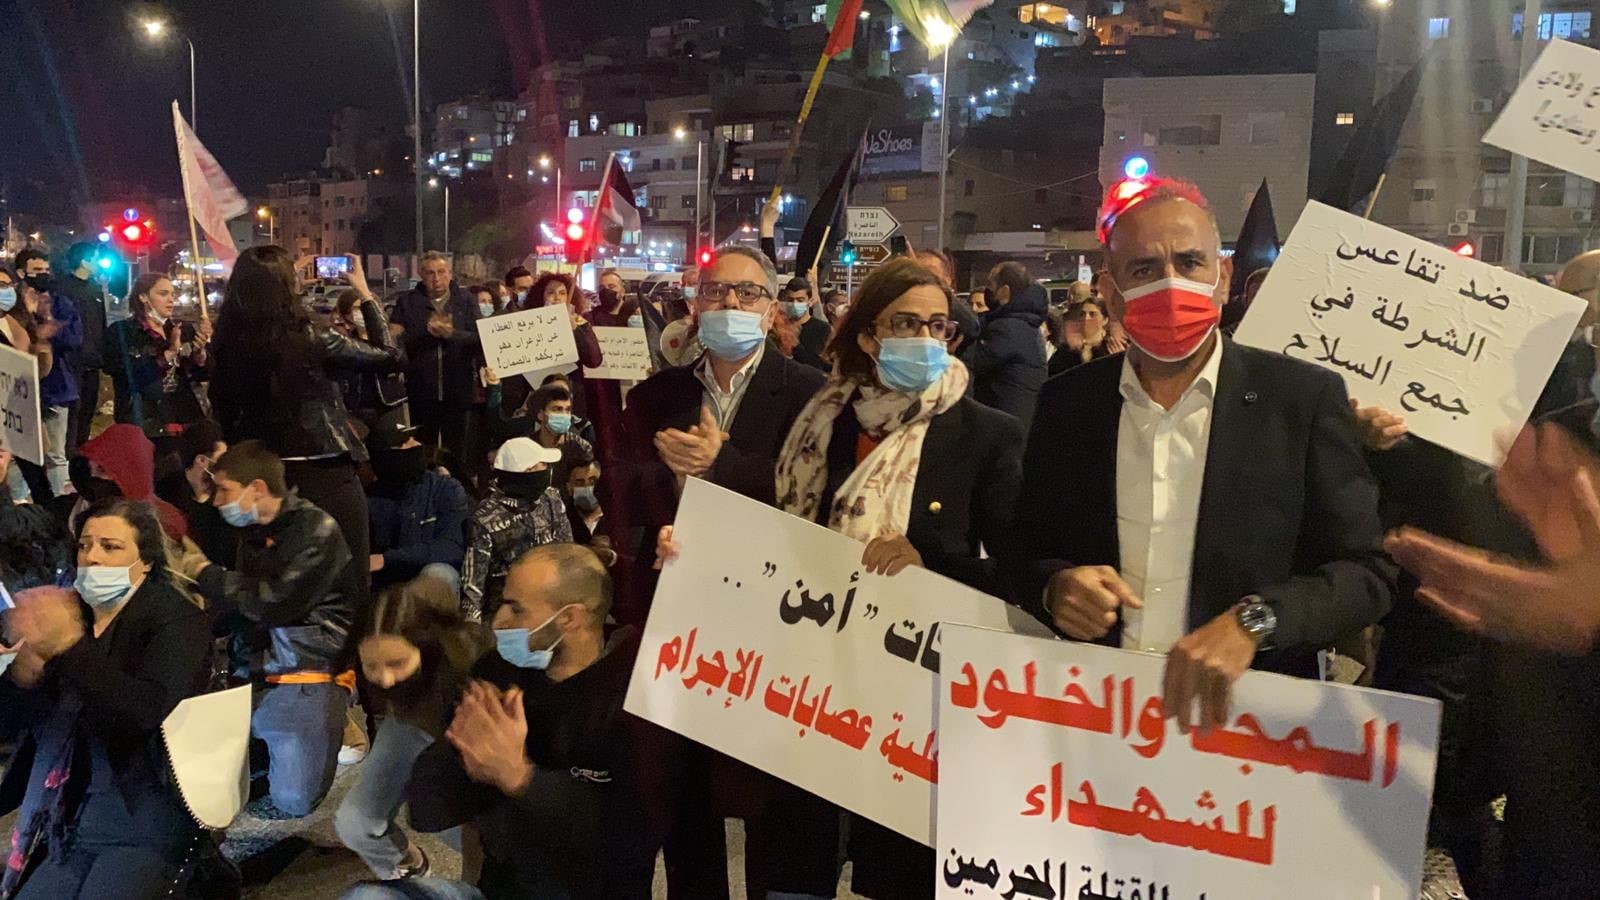 Hundreds block the entrance to Nazareth on Friday night, February 5, 2021. First from right: Hadash secretary, Mansour Dahamshe; next to him are two Joint List MKs from Balad: Heba Yazbak and Mtanes Shehadah; among the placards: "Glory and eternity to the martyrs"; "Against police inaction in collecting arms."